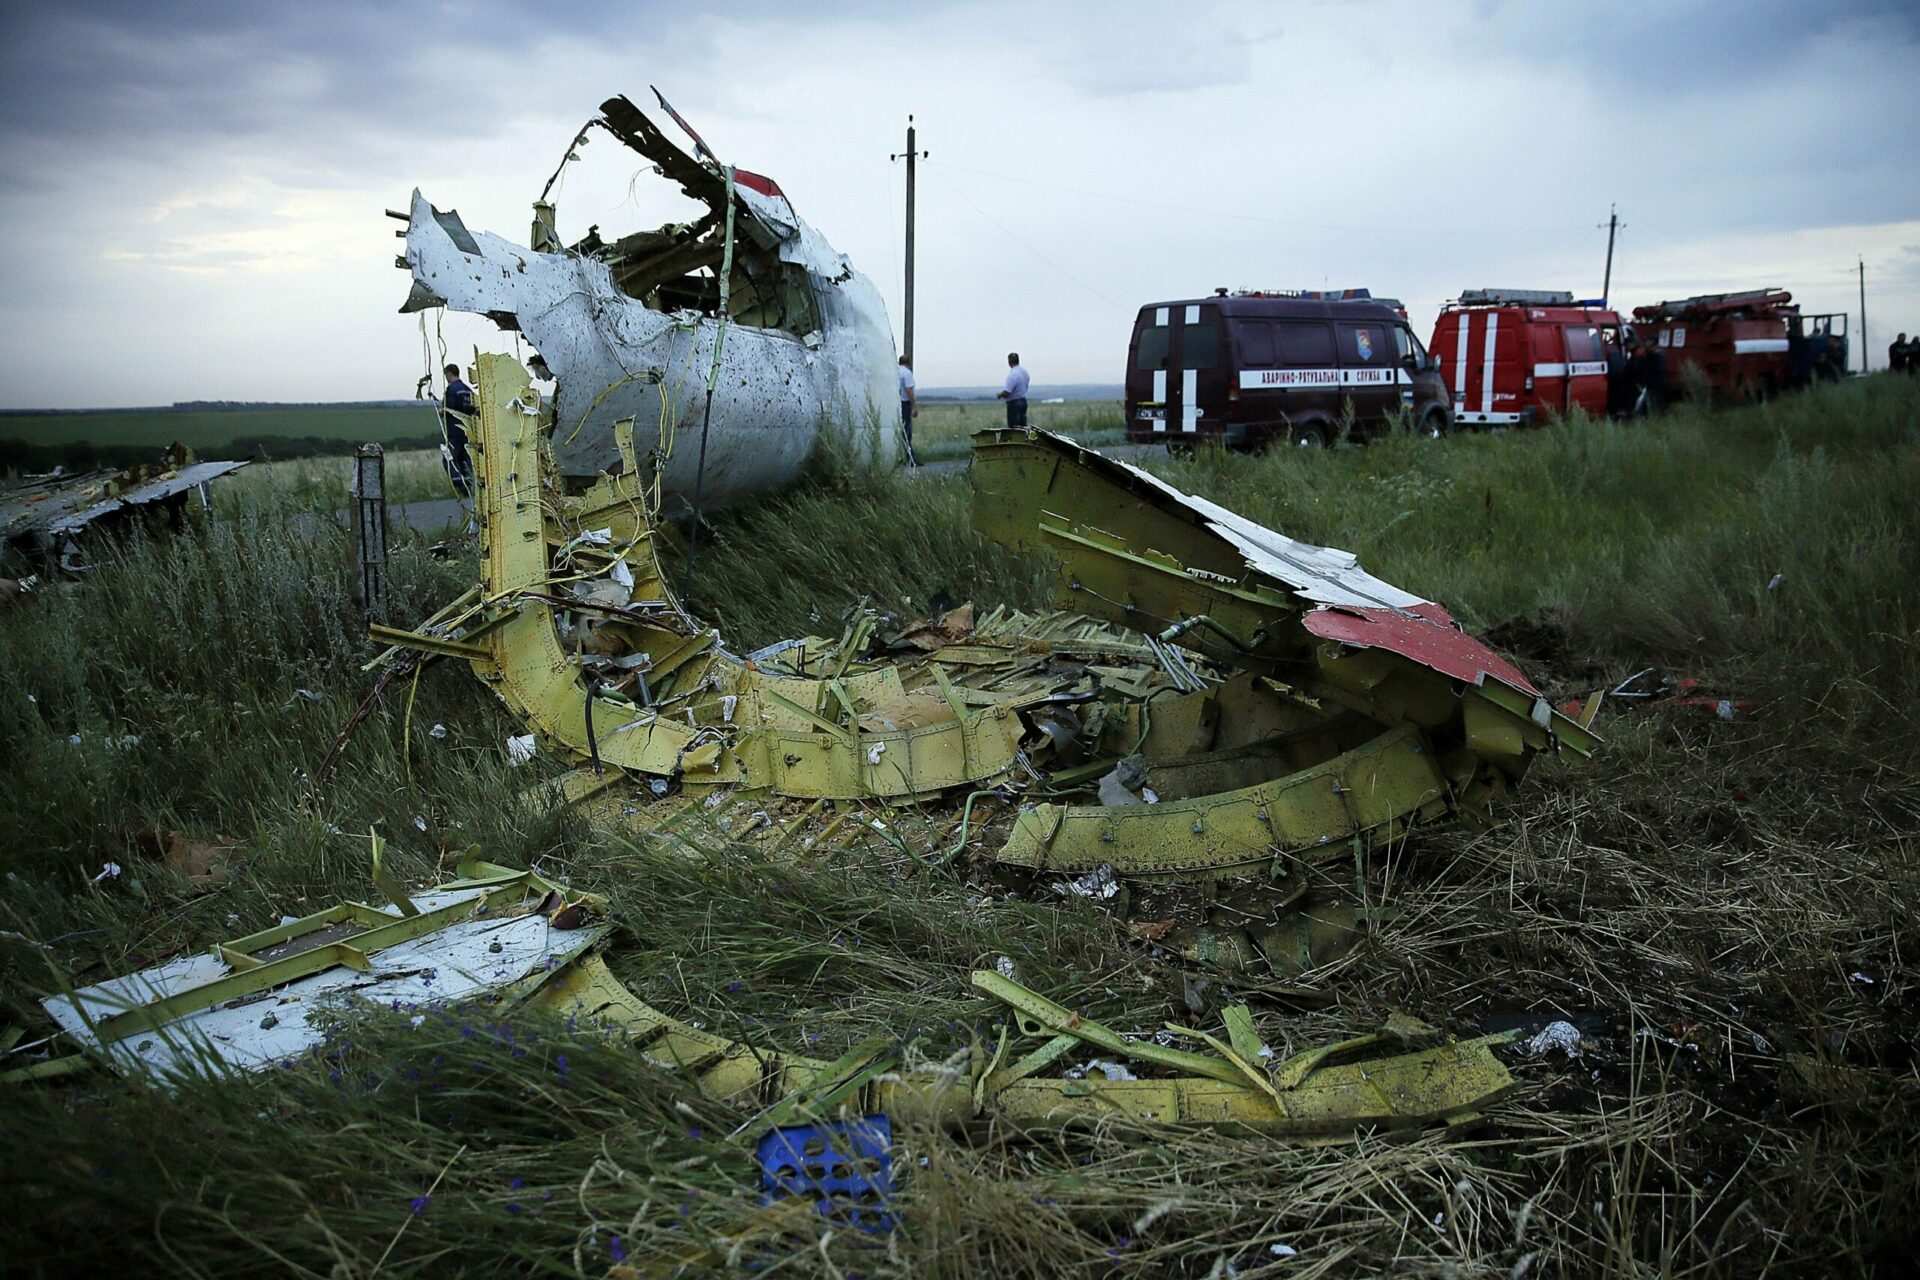 Putin likely provided missile that downed Malaysia jet, investigators say